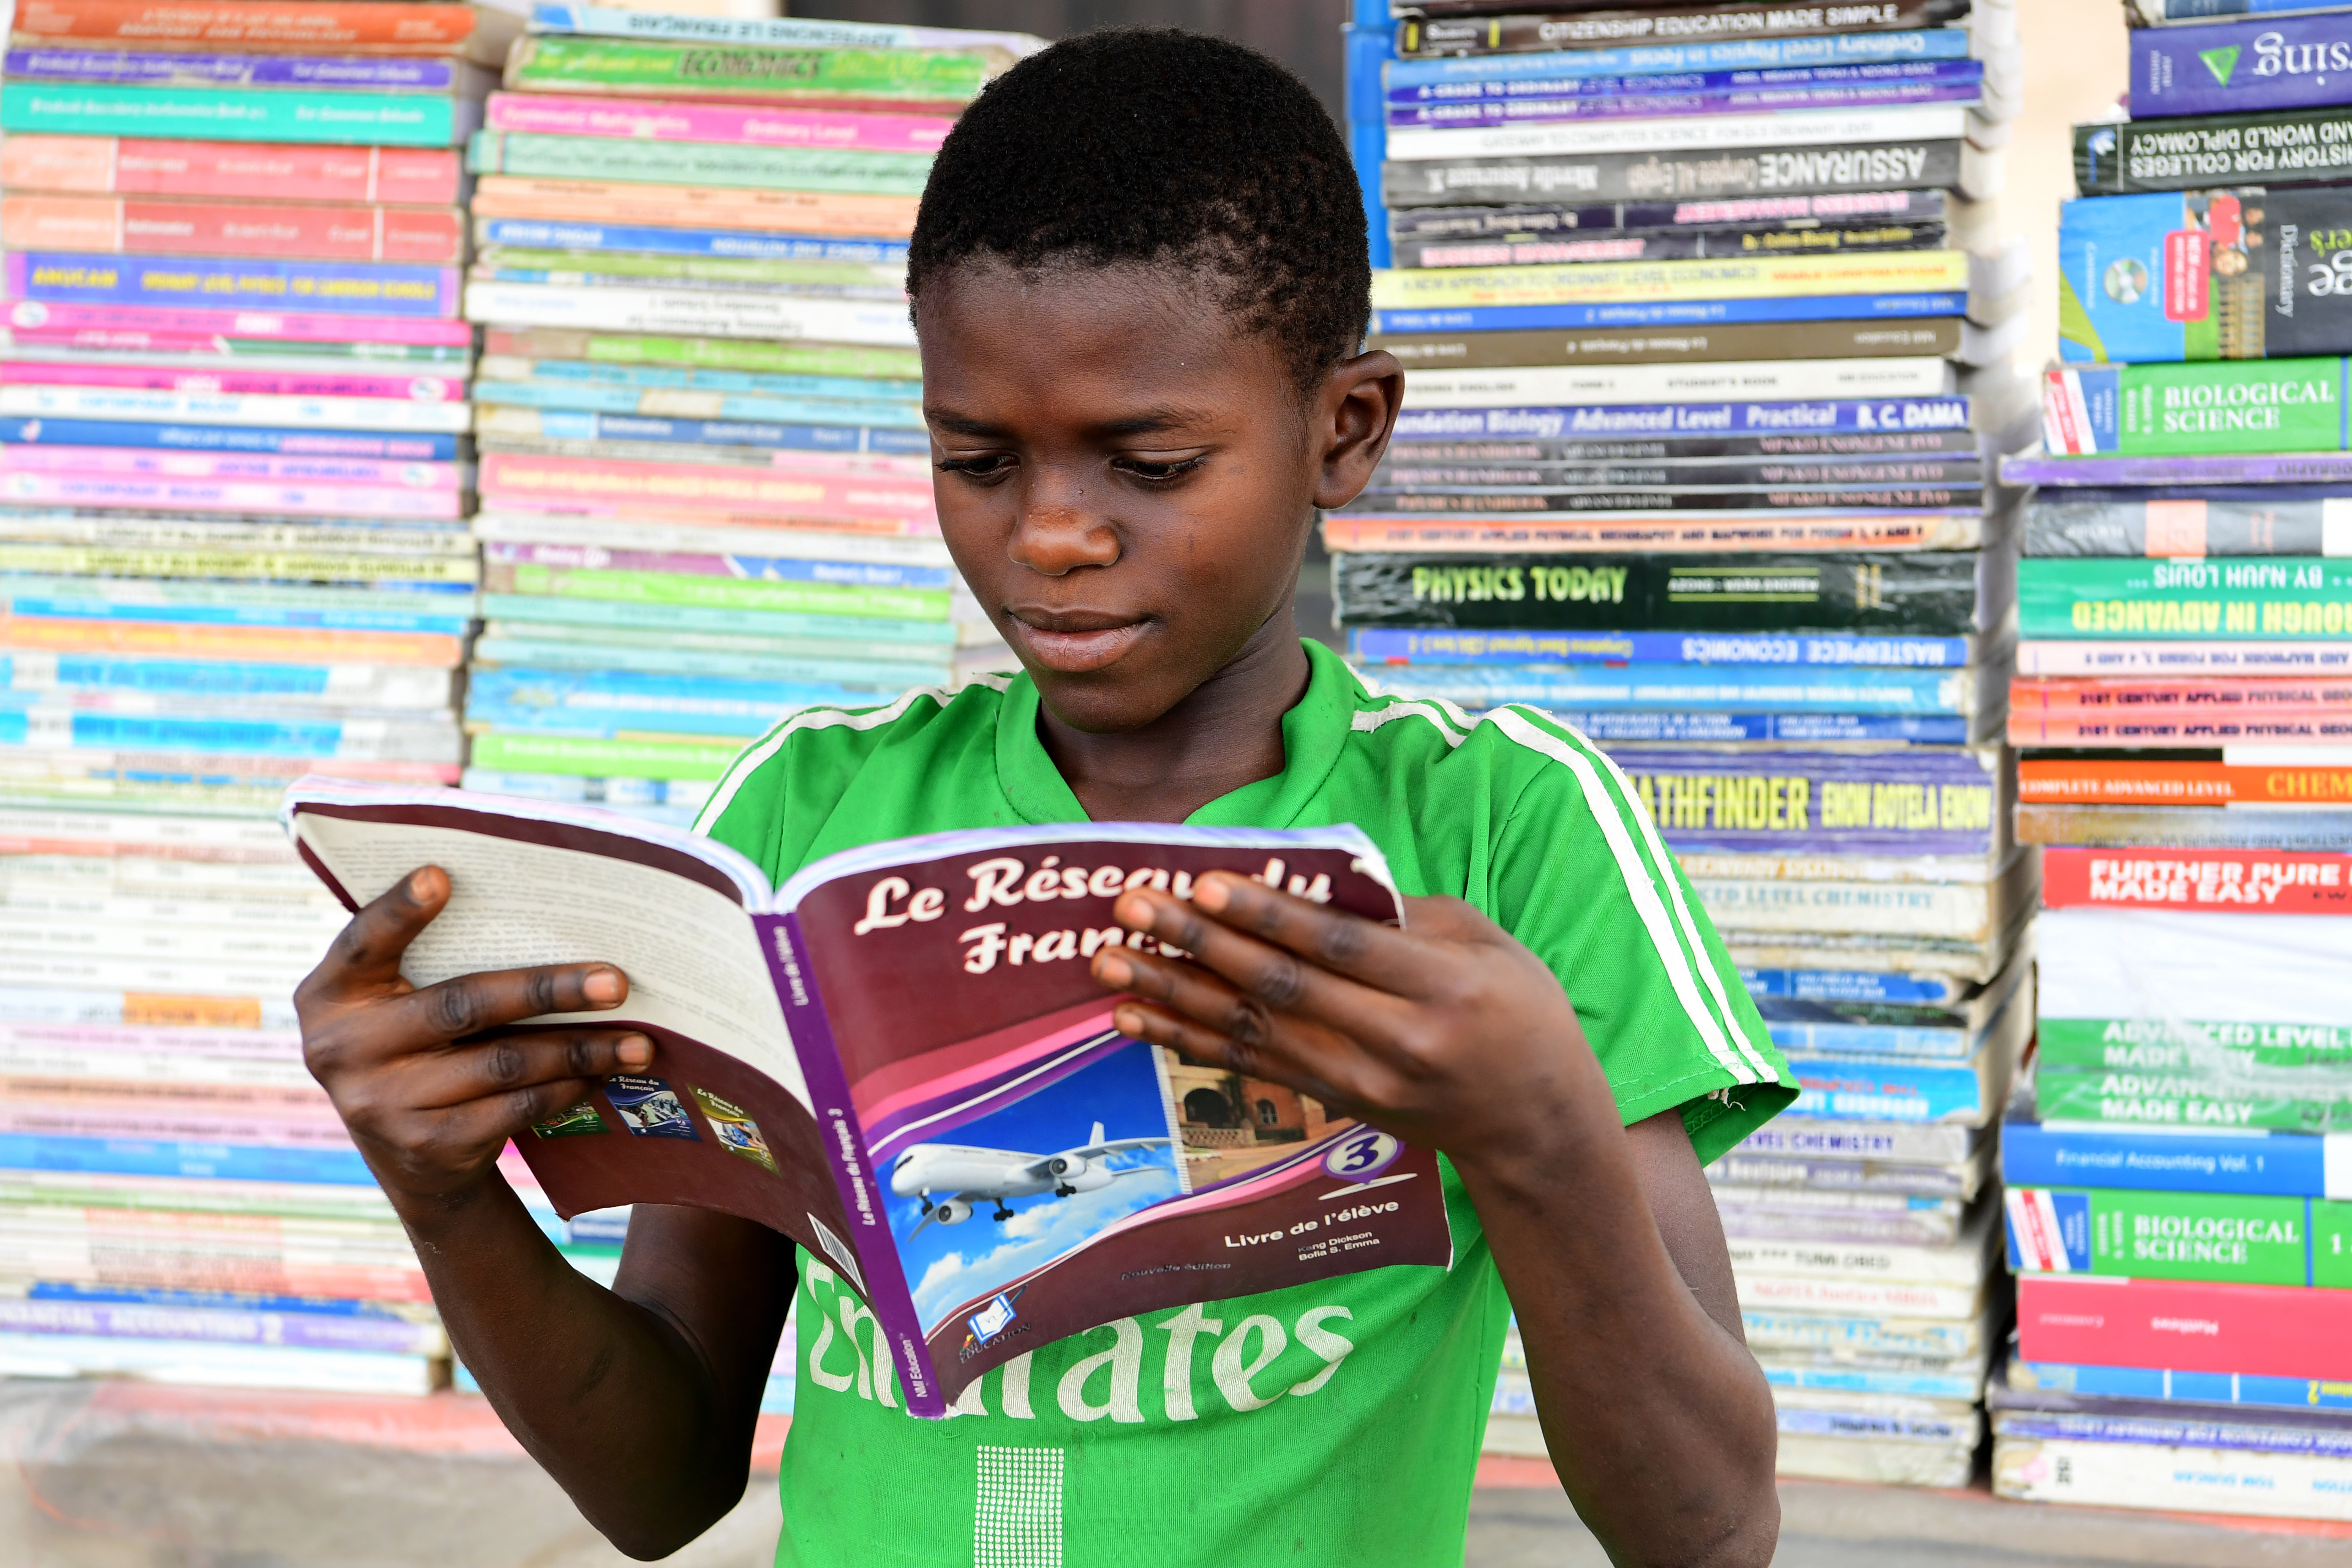 A boy reads a book in front of stacks of other books. 